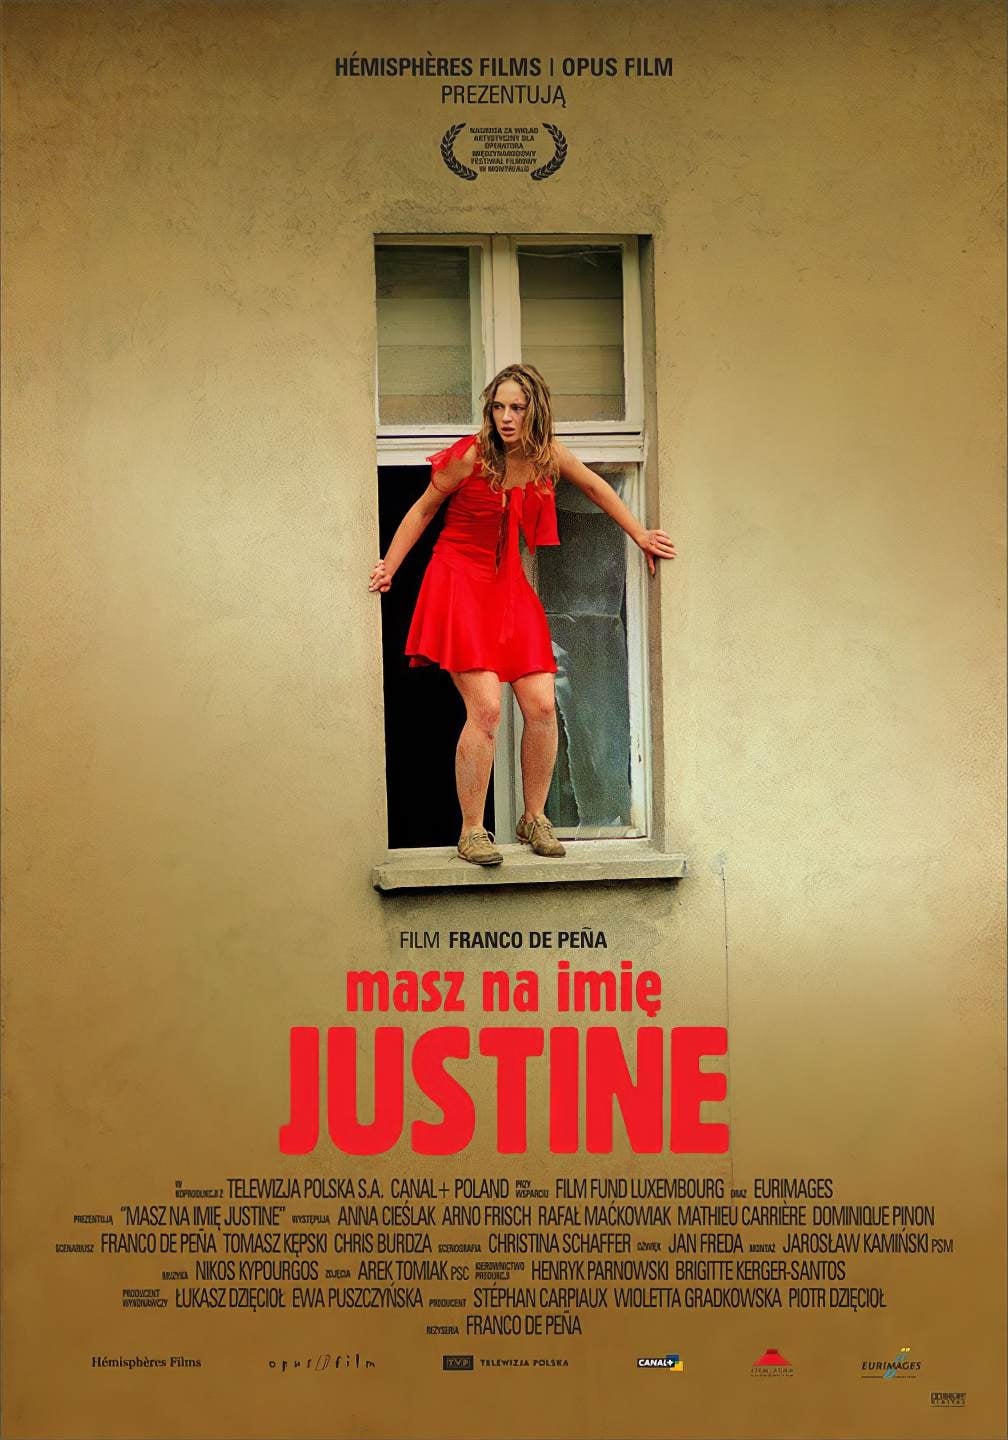 Your Name is Justine